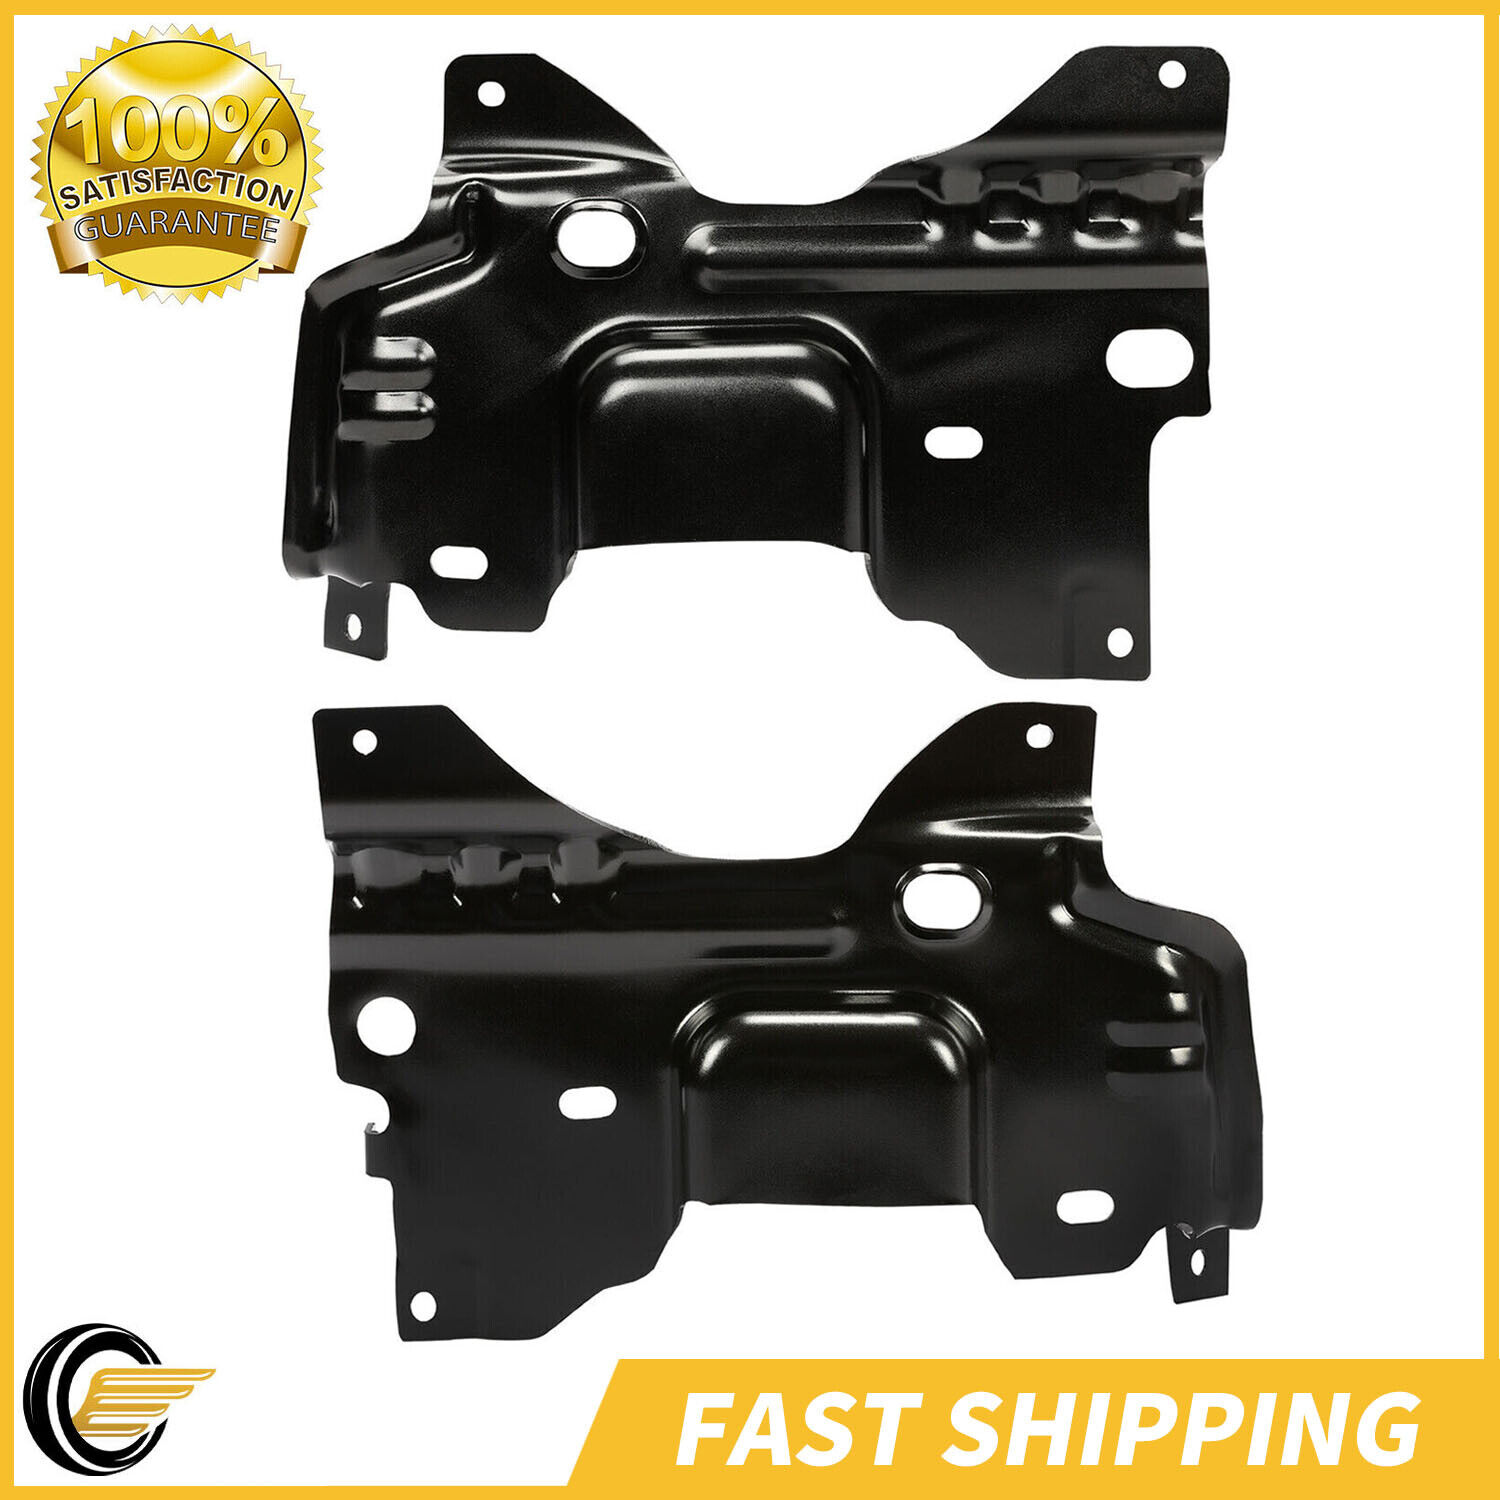 Brand New Bumper Bracket Fits 2009-2014 Ford F-150 Front Left & Right set of 2